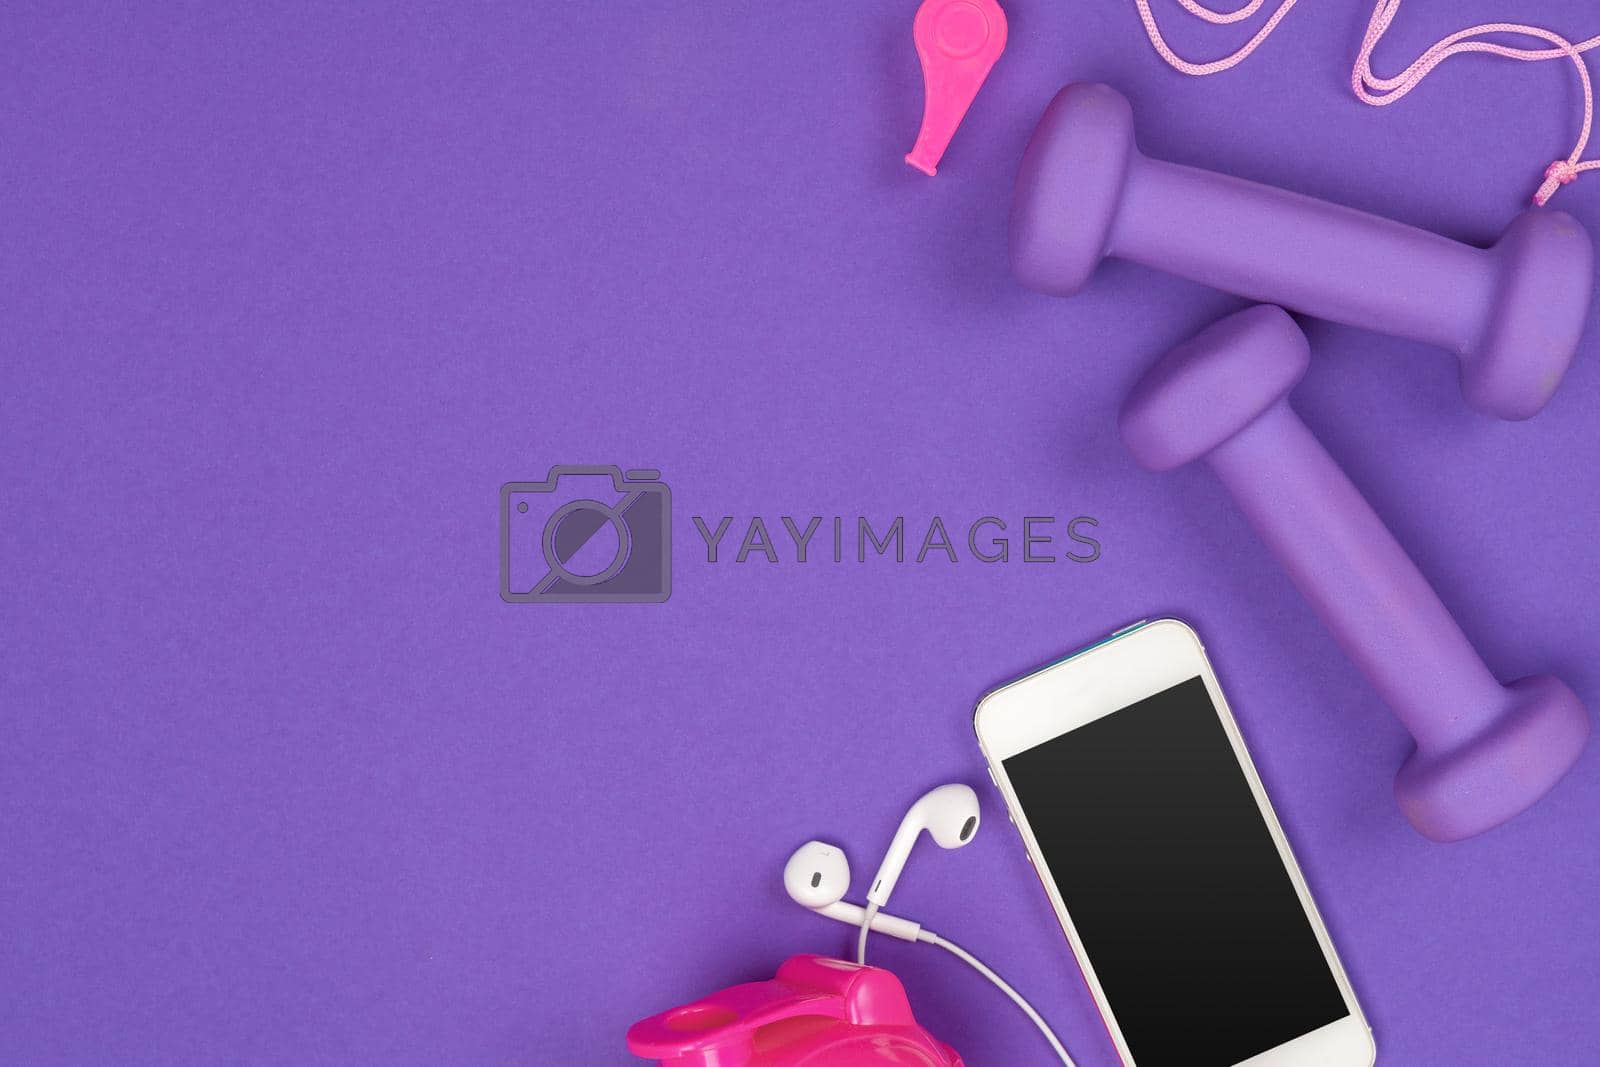 Fitness accessories on a color background.